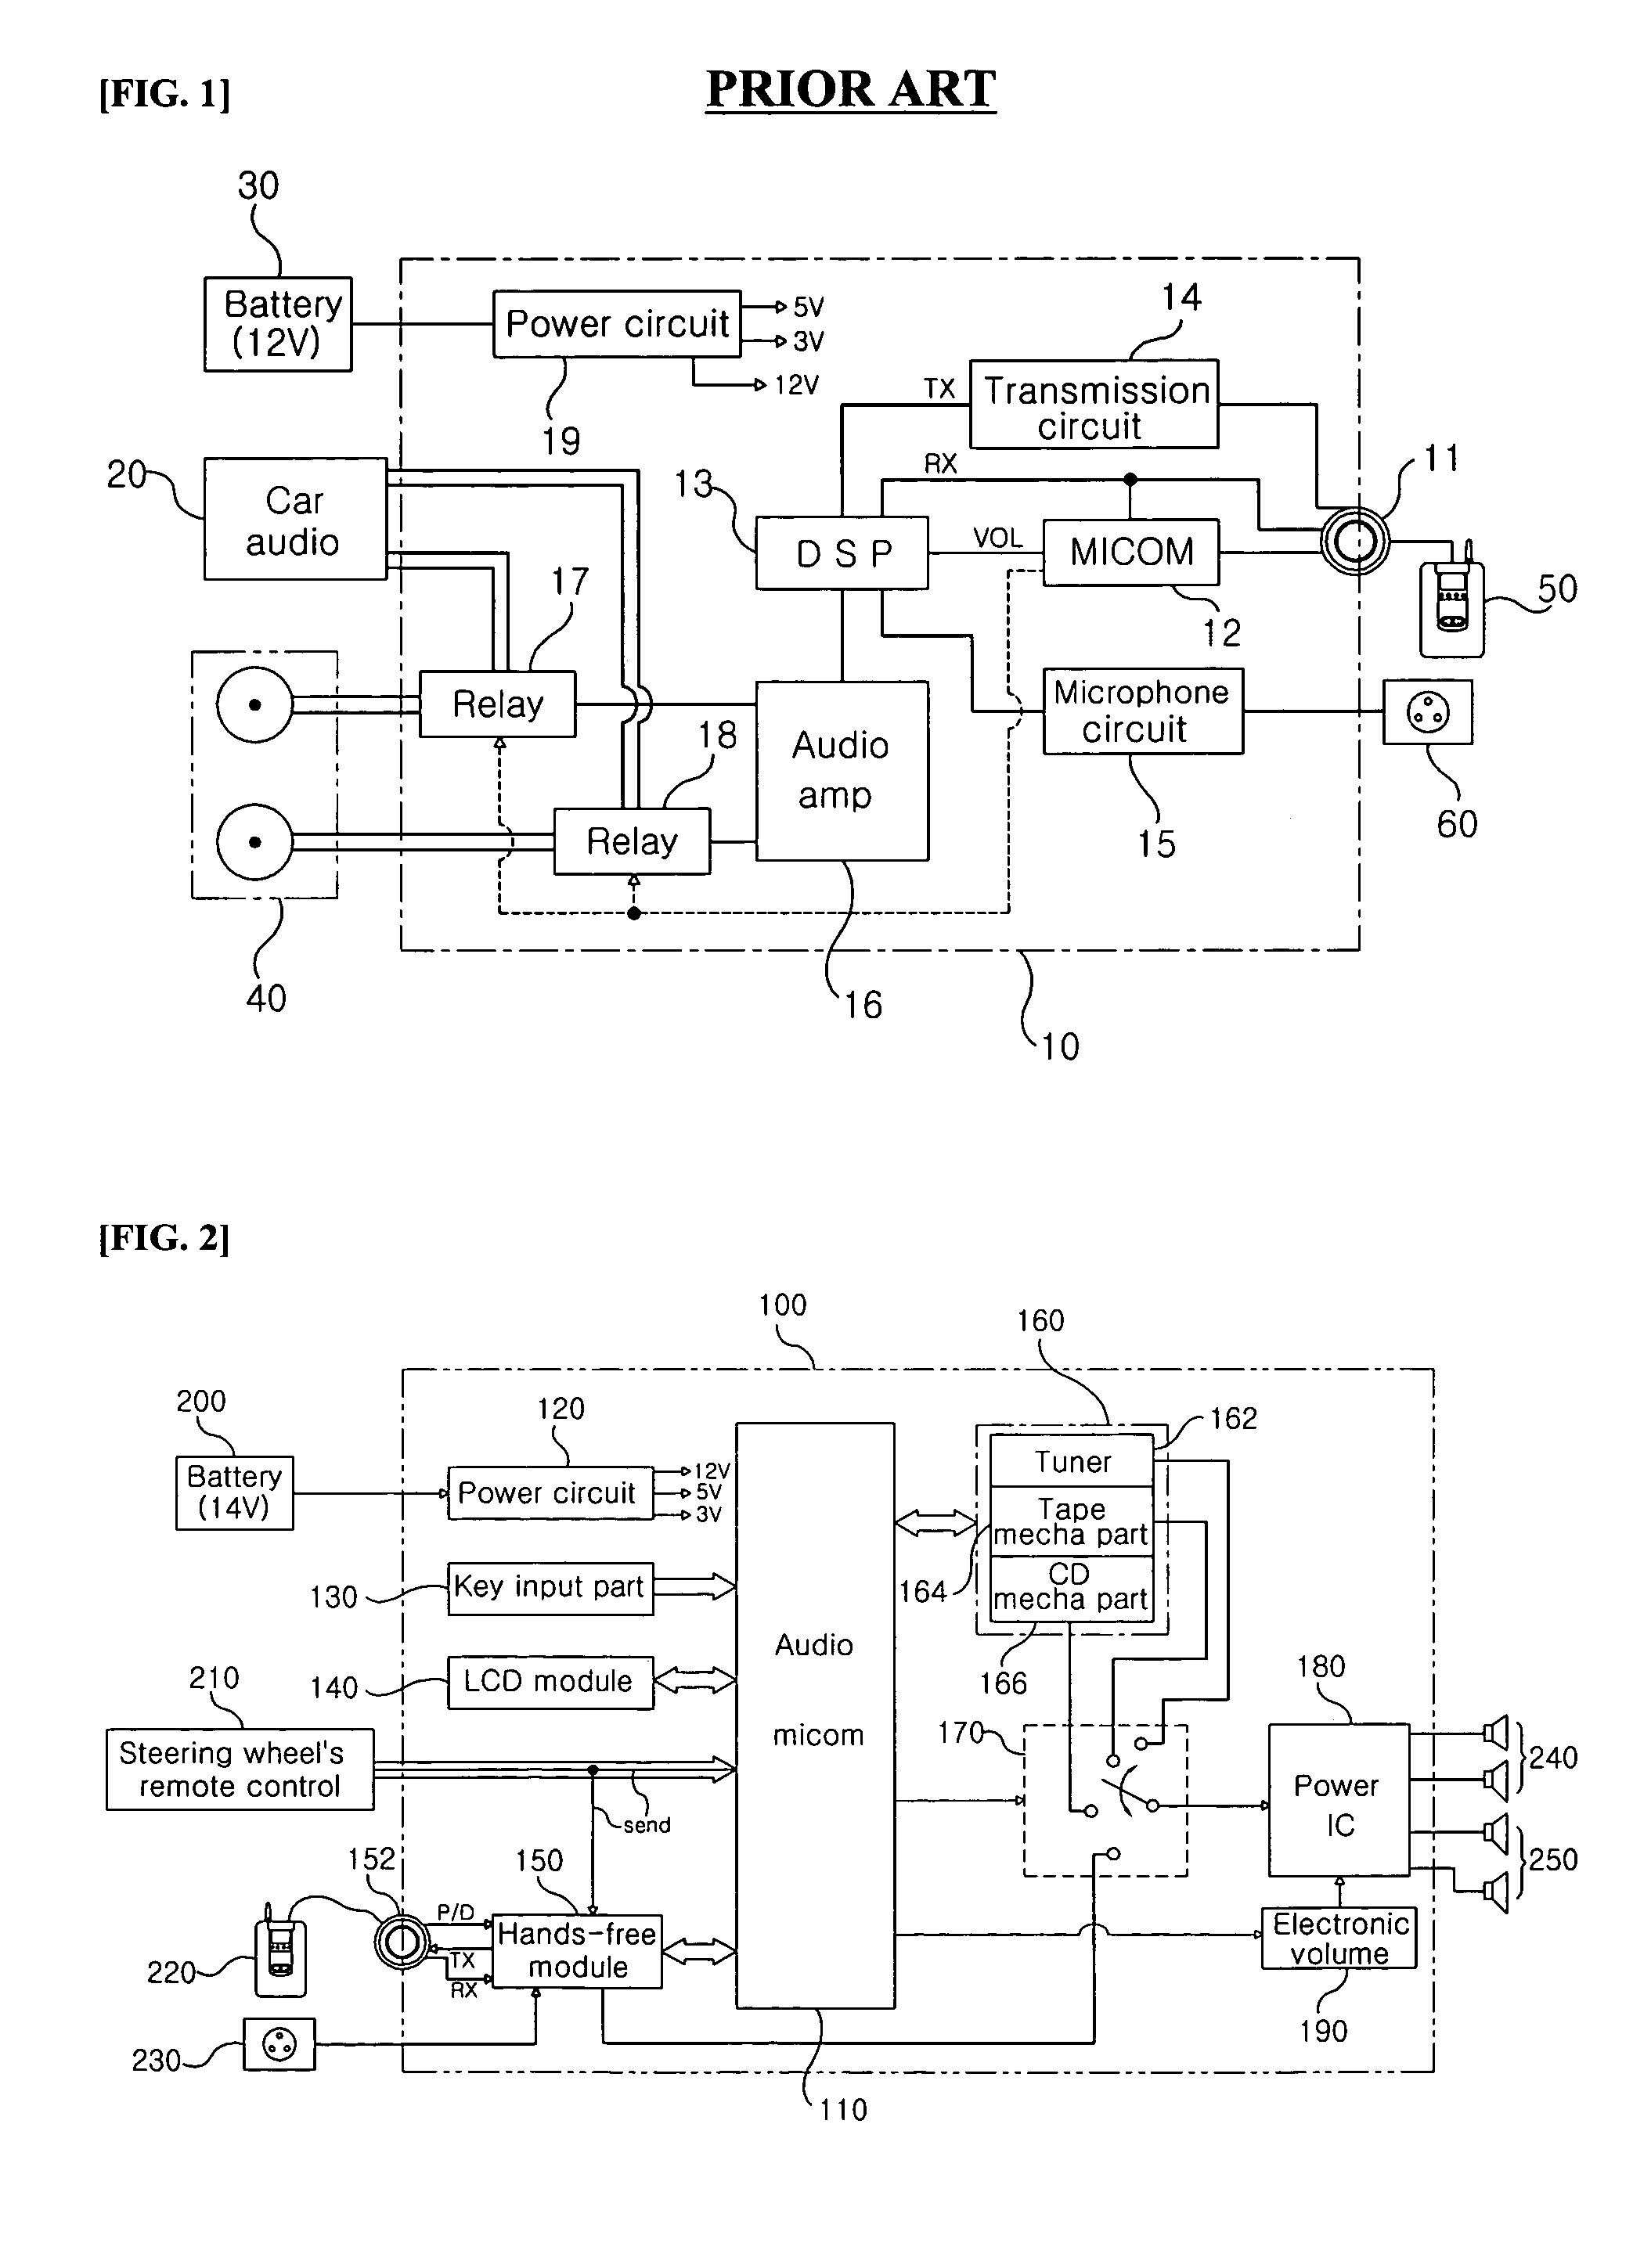 Automatic mode changing method for car audio system with hands-free therein